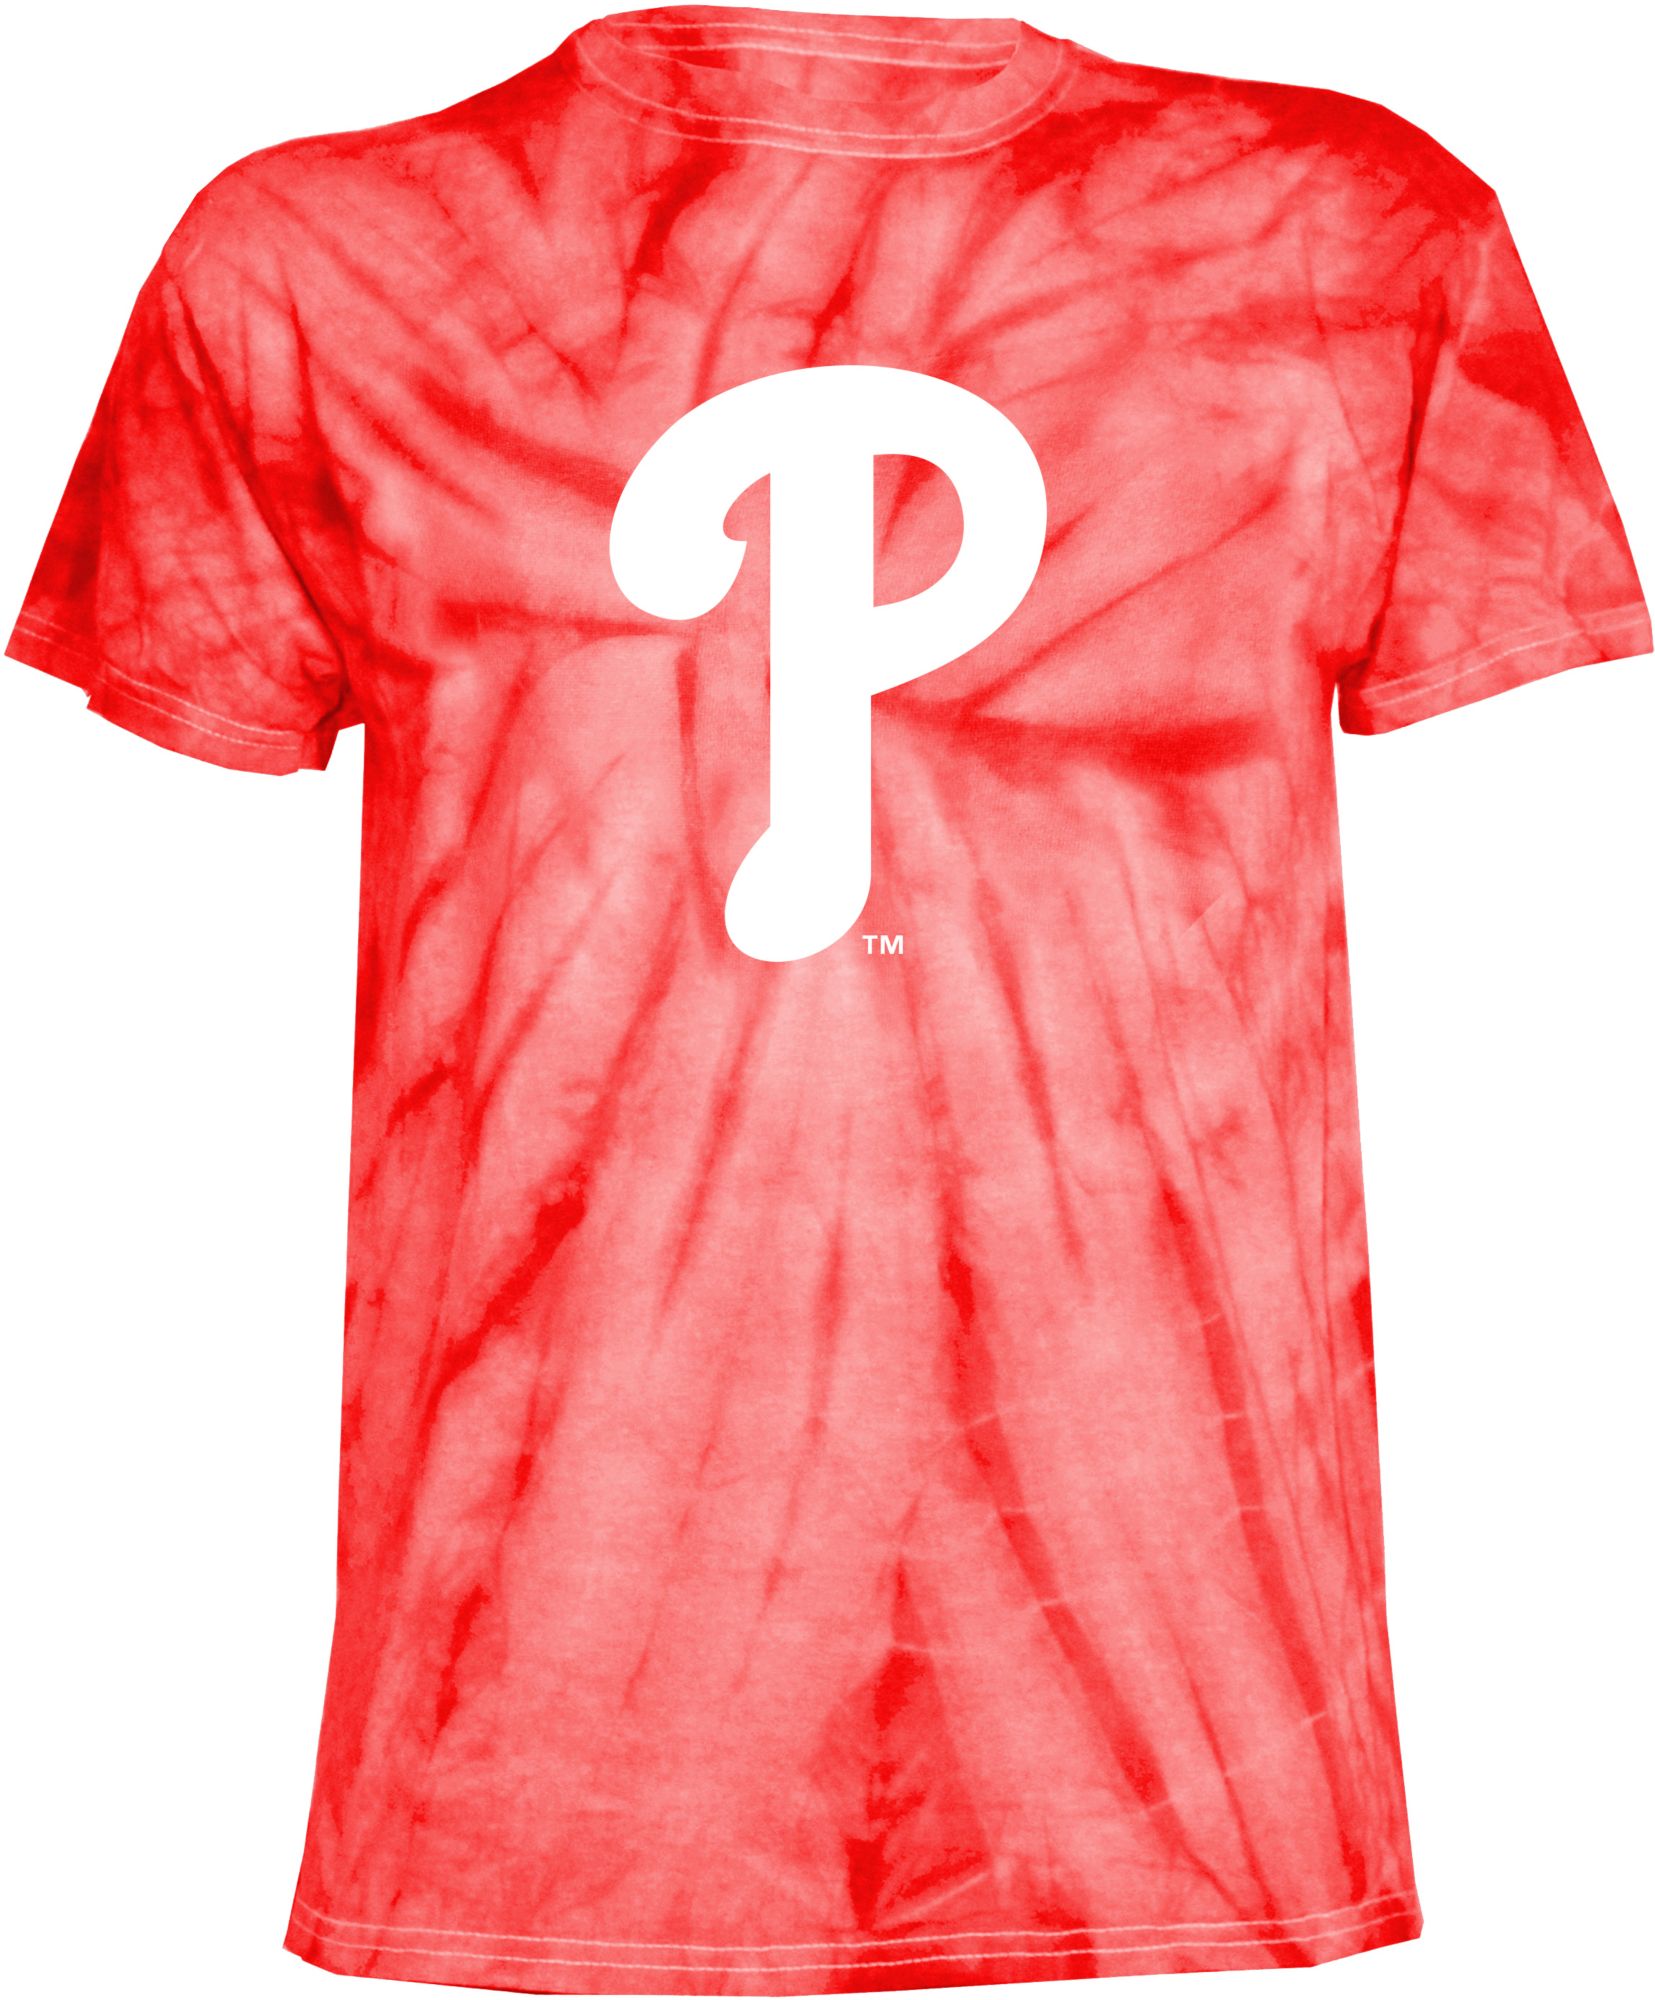 Stitches Youth Philadelphia Phillies Red Tie Dye T-Shirt